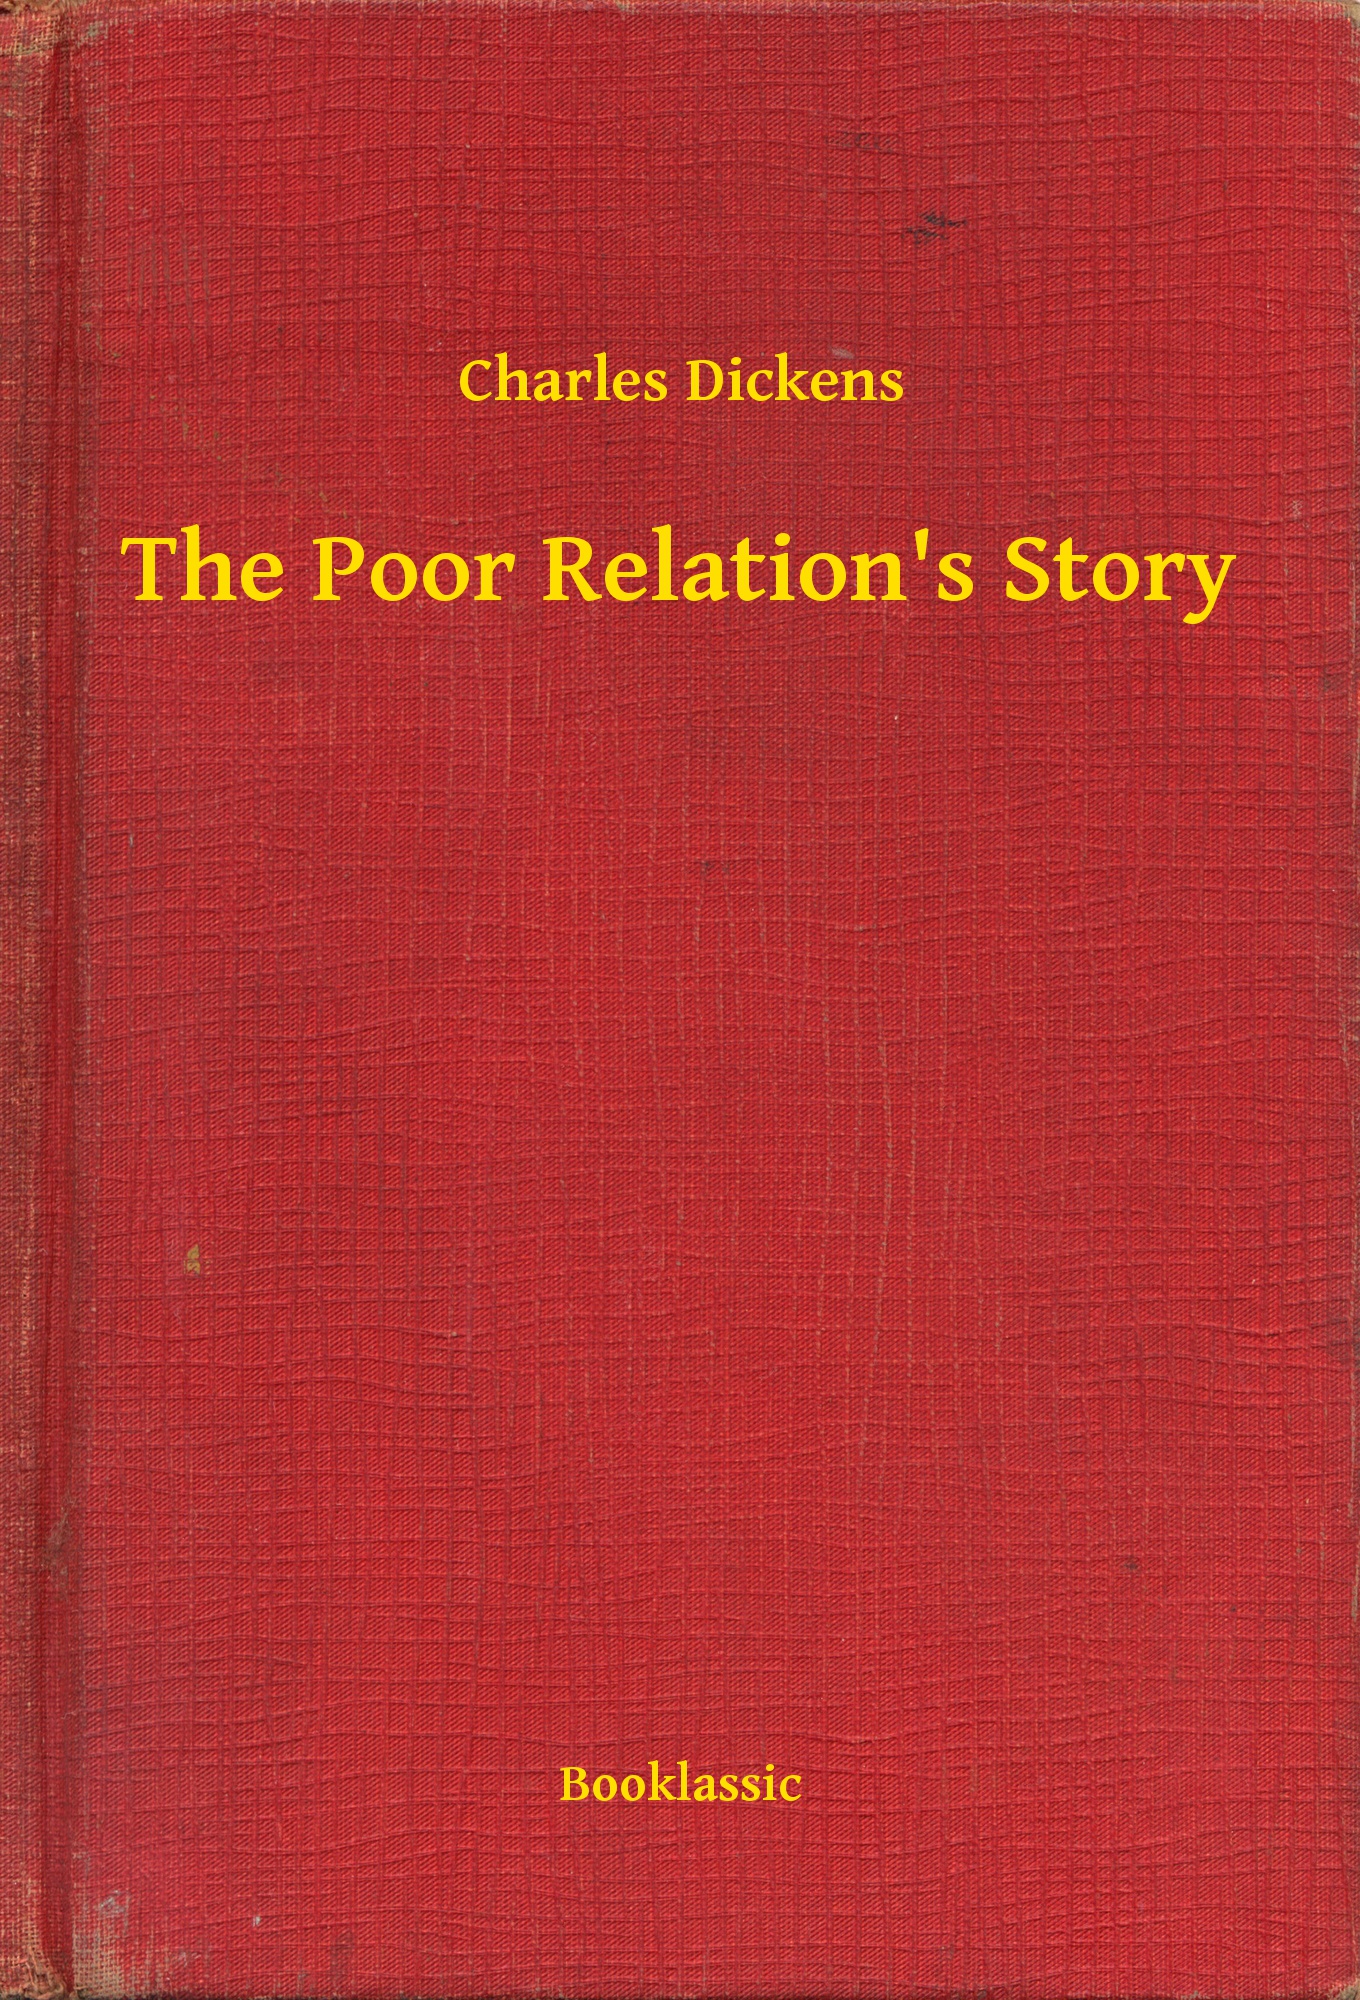 The Poor Relation"s Story